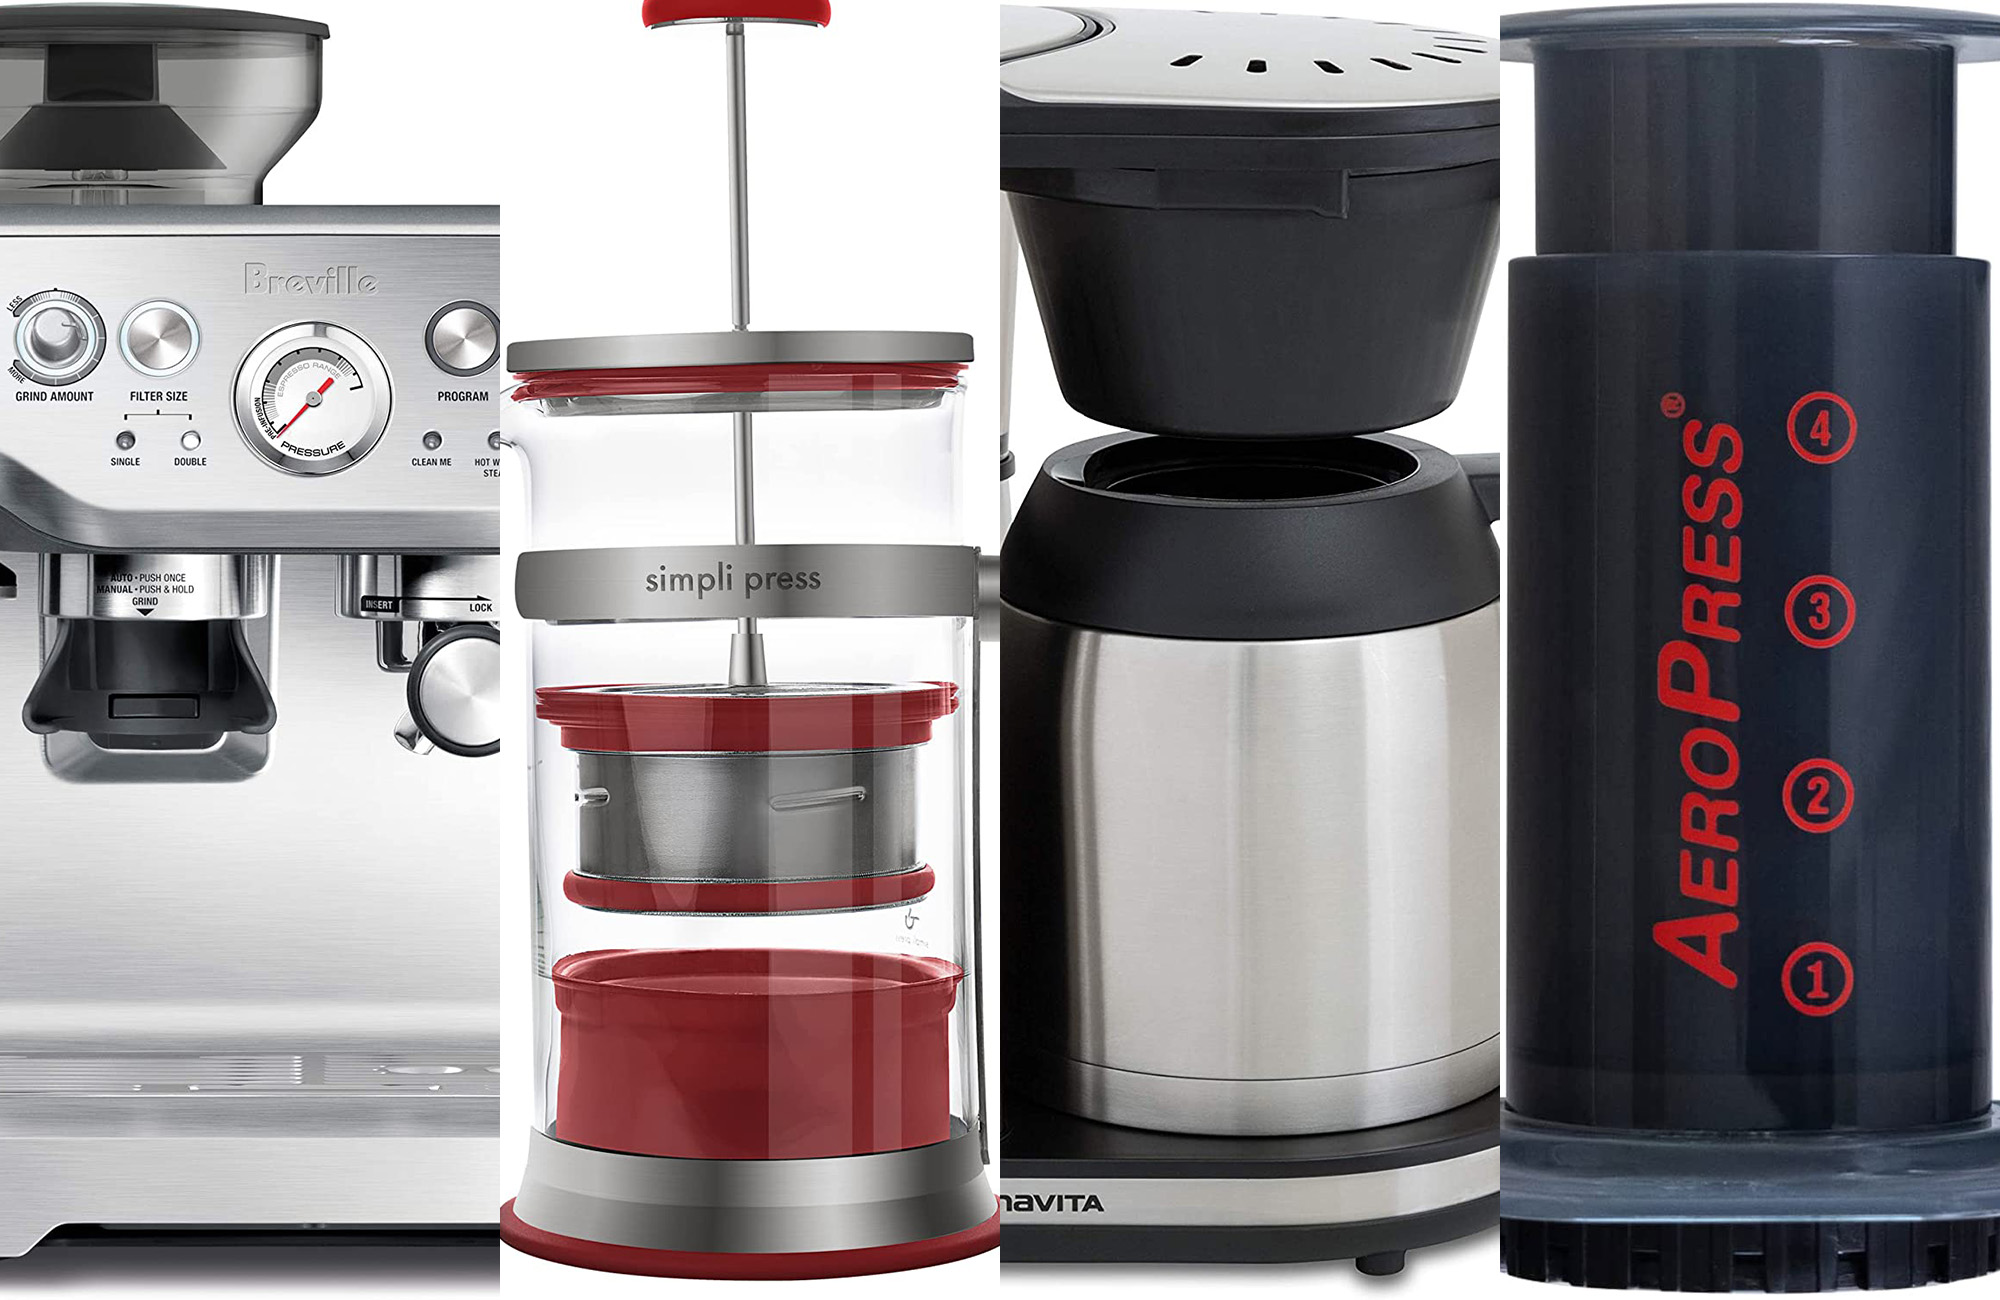 Gifts coffee lovers will buzz about: Nespresso's new gadgets and